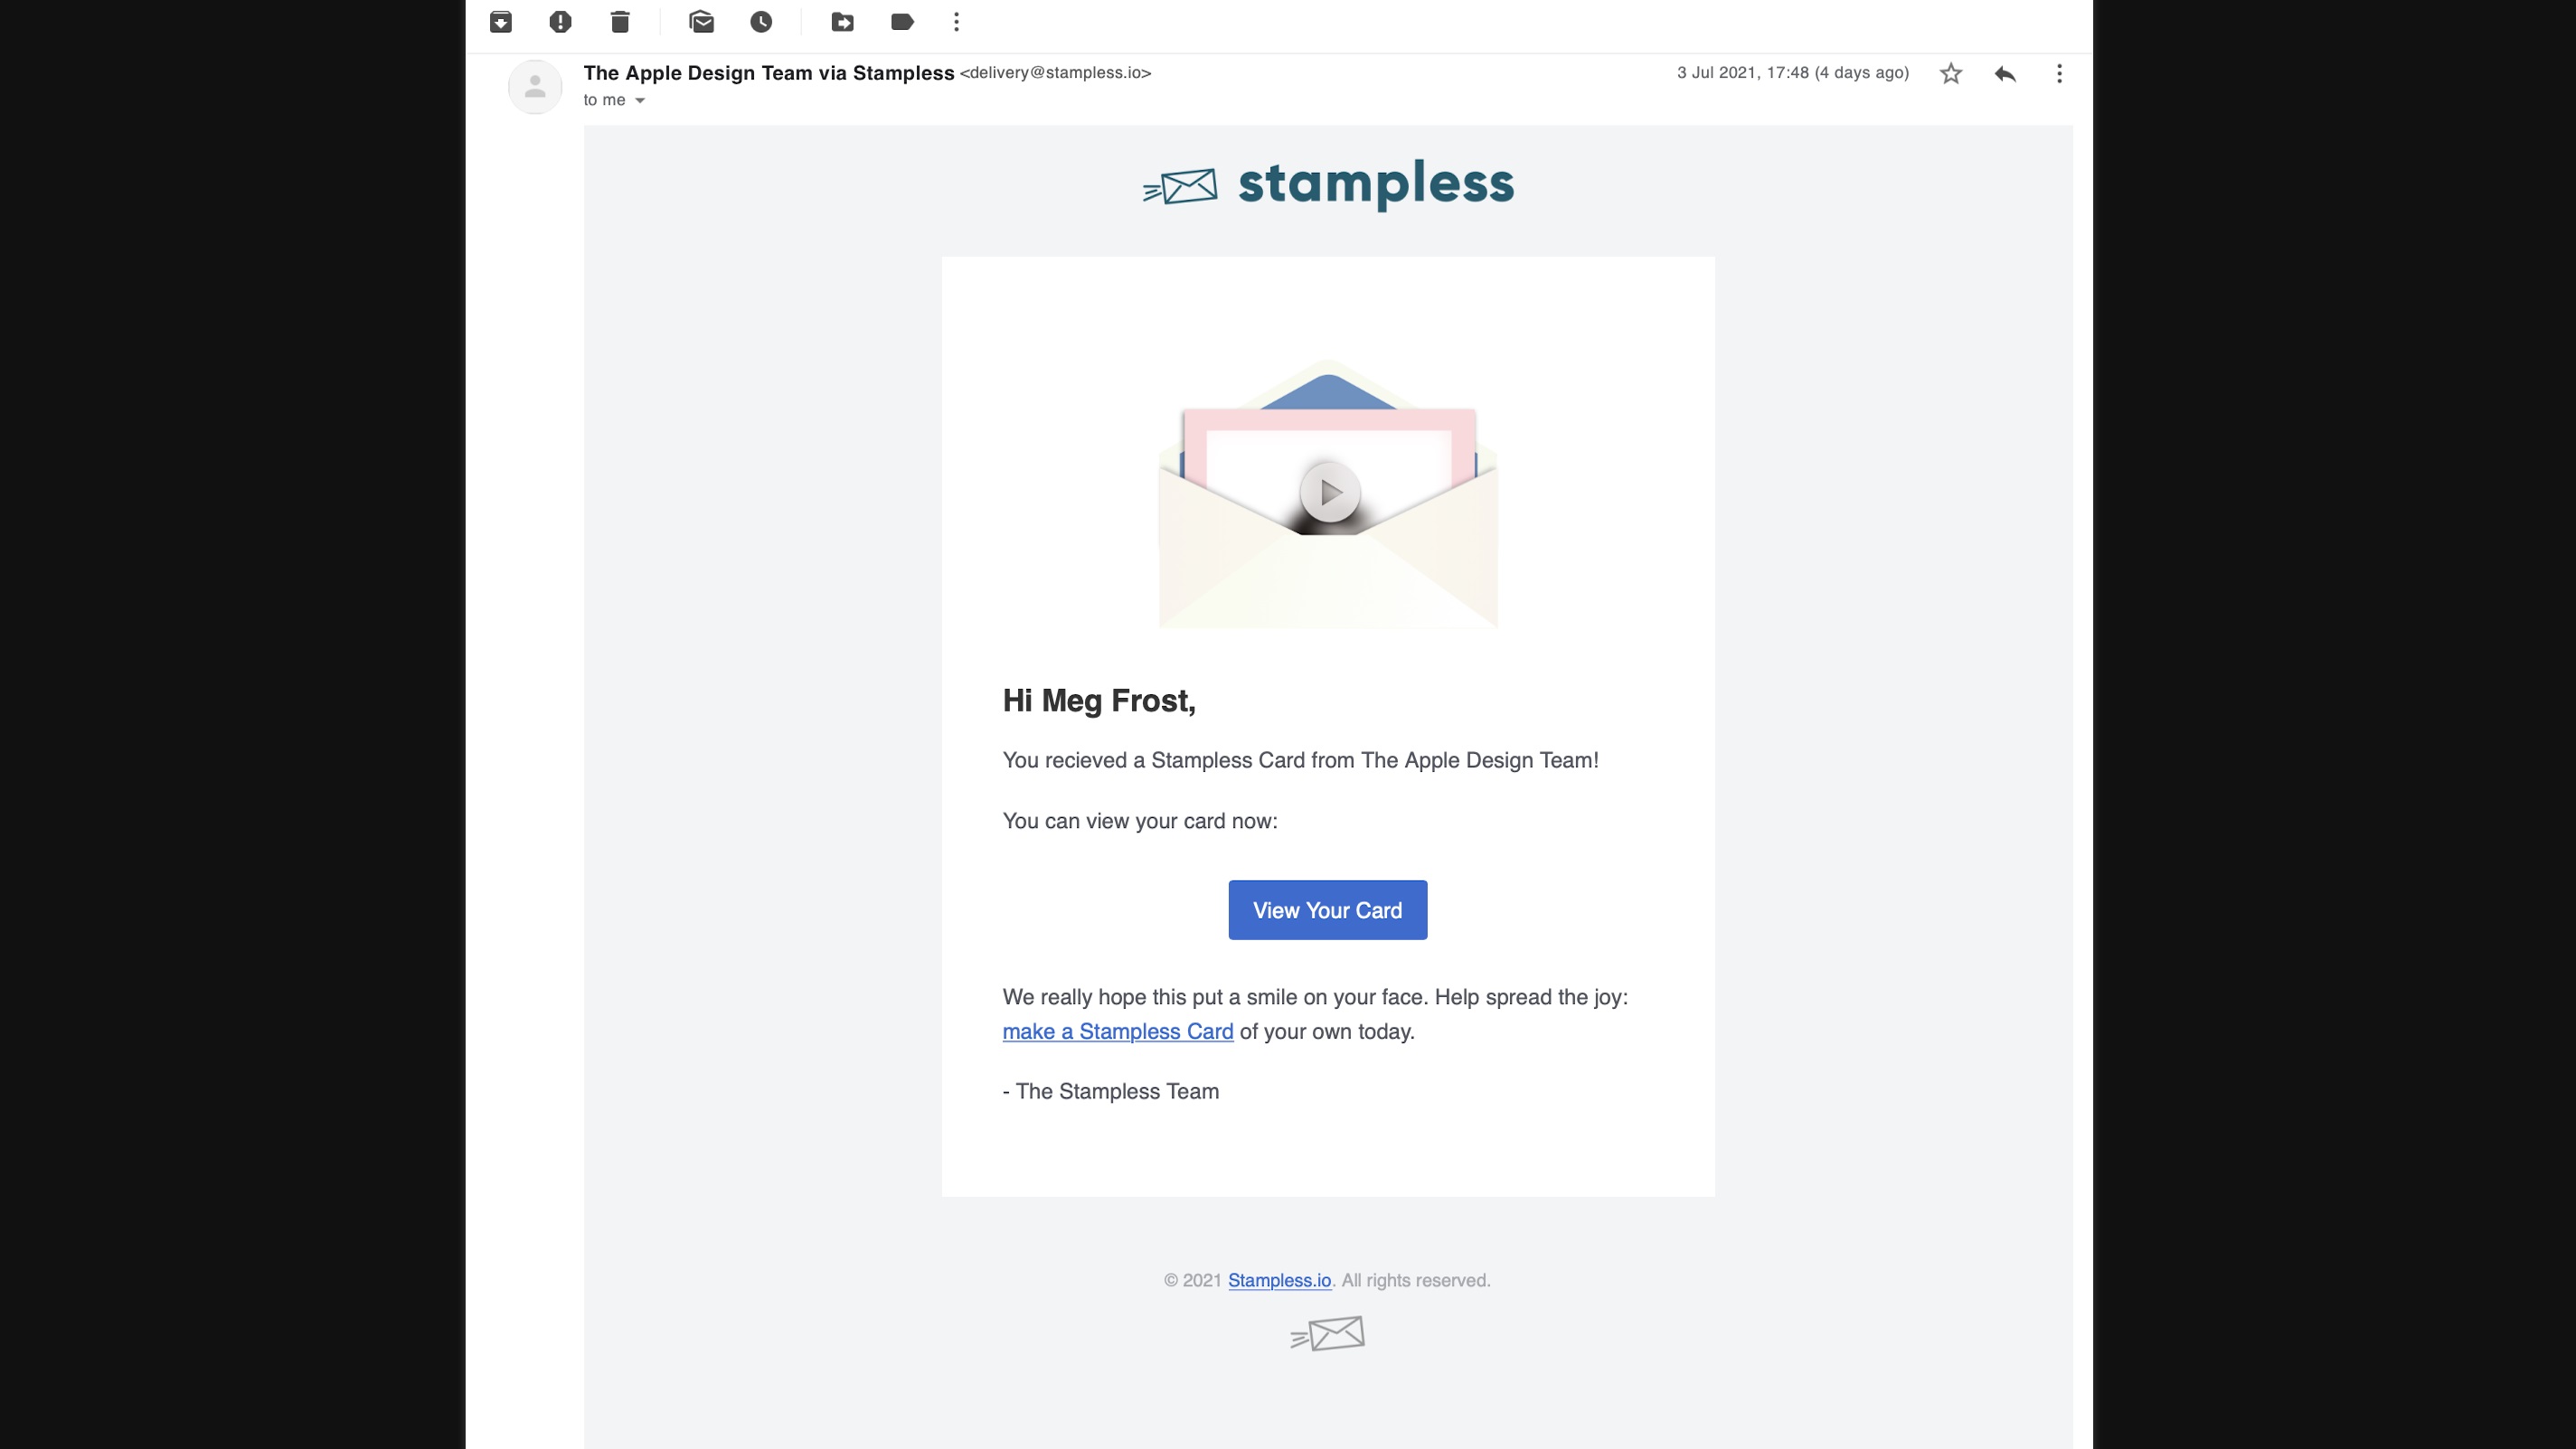 Know more about Stampless.io